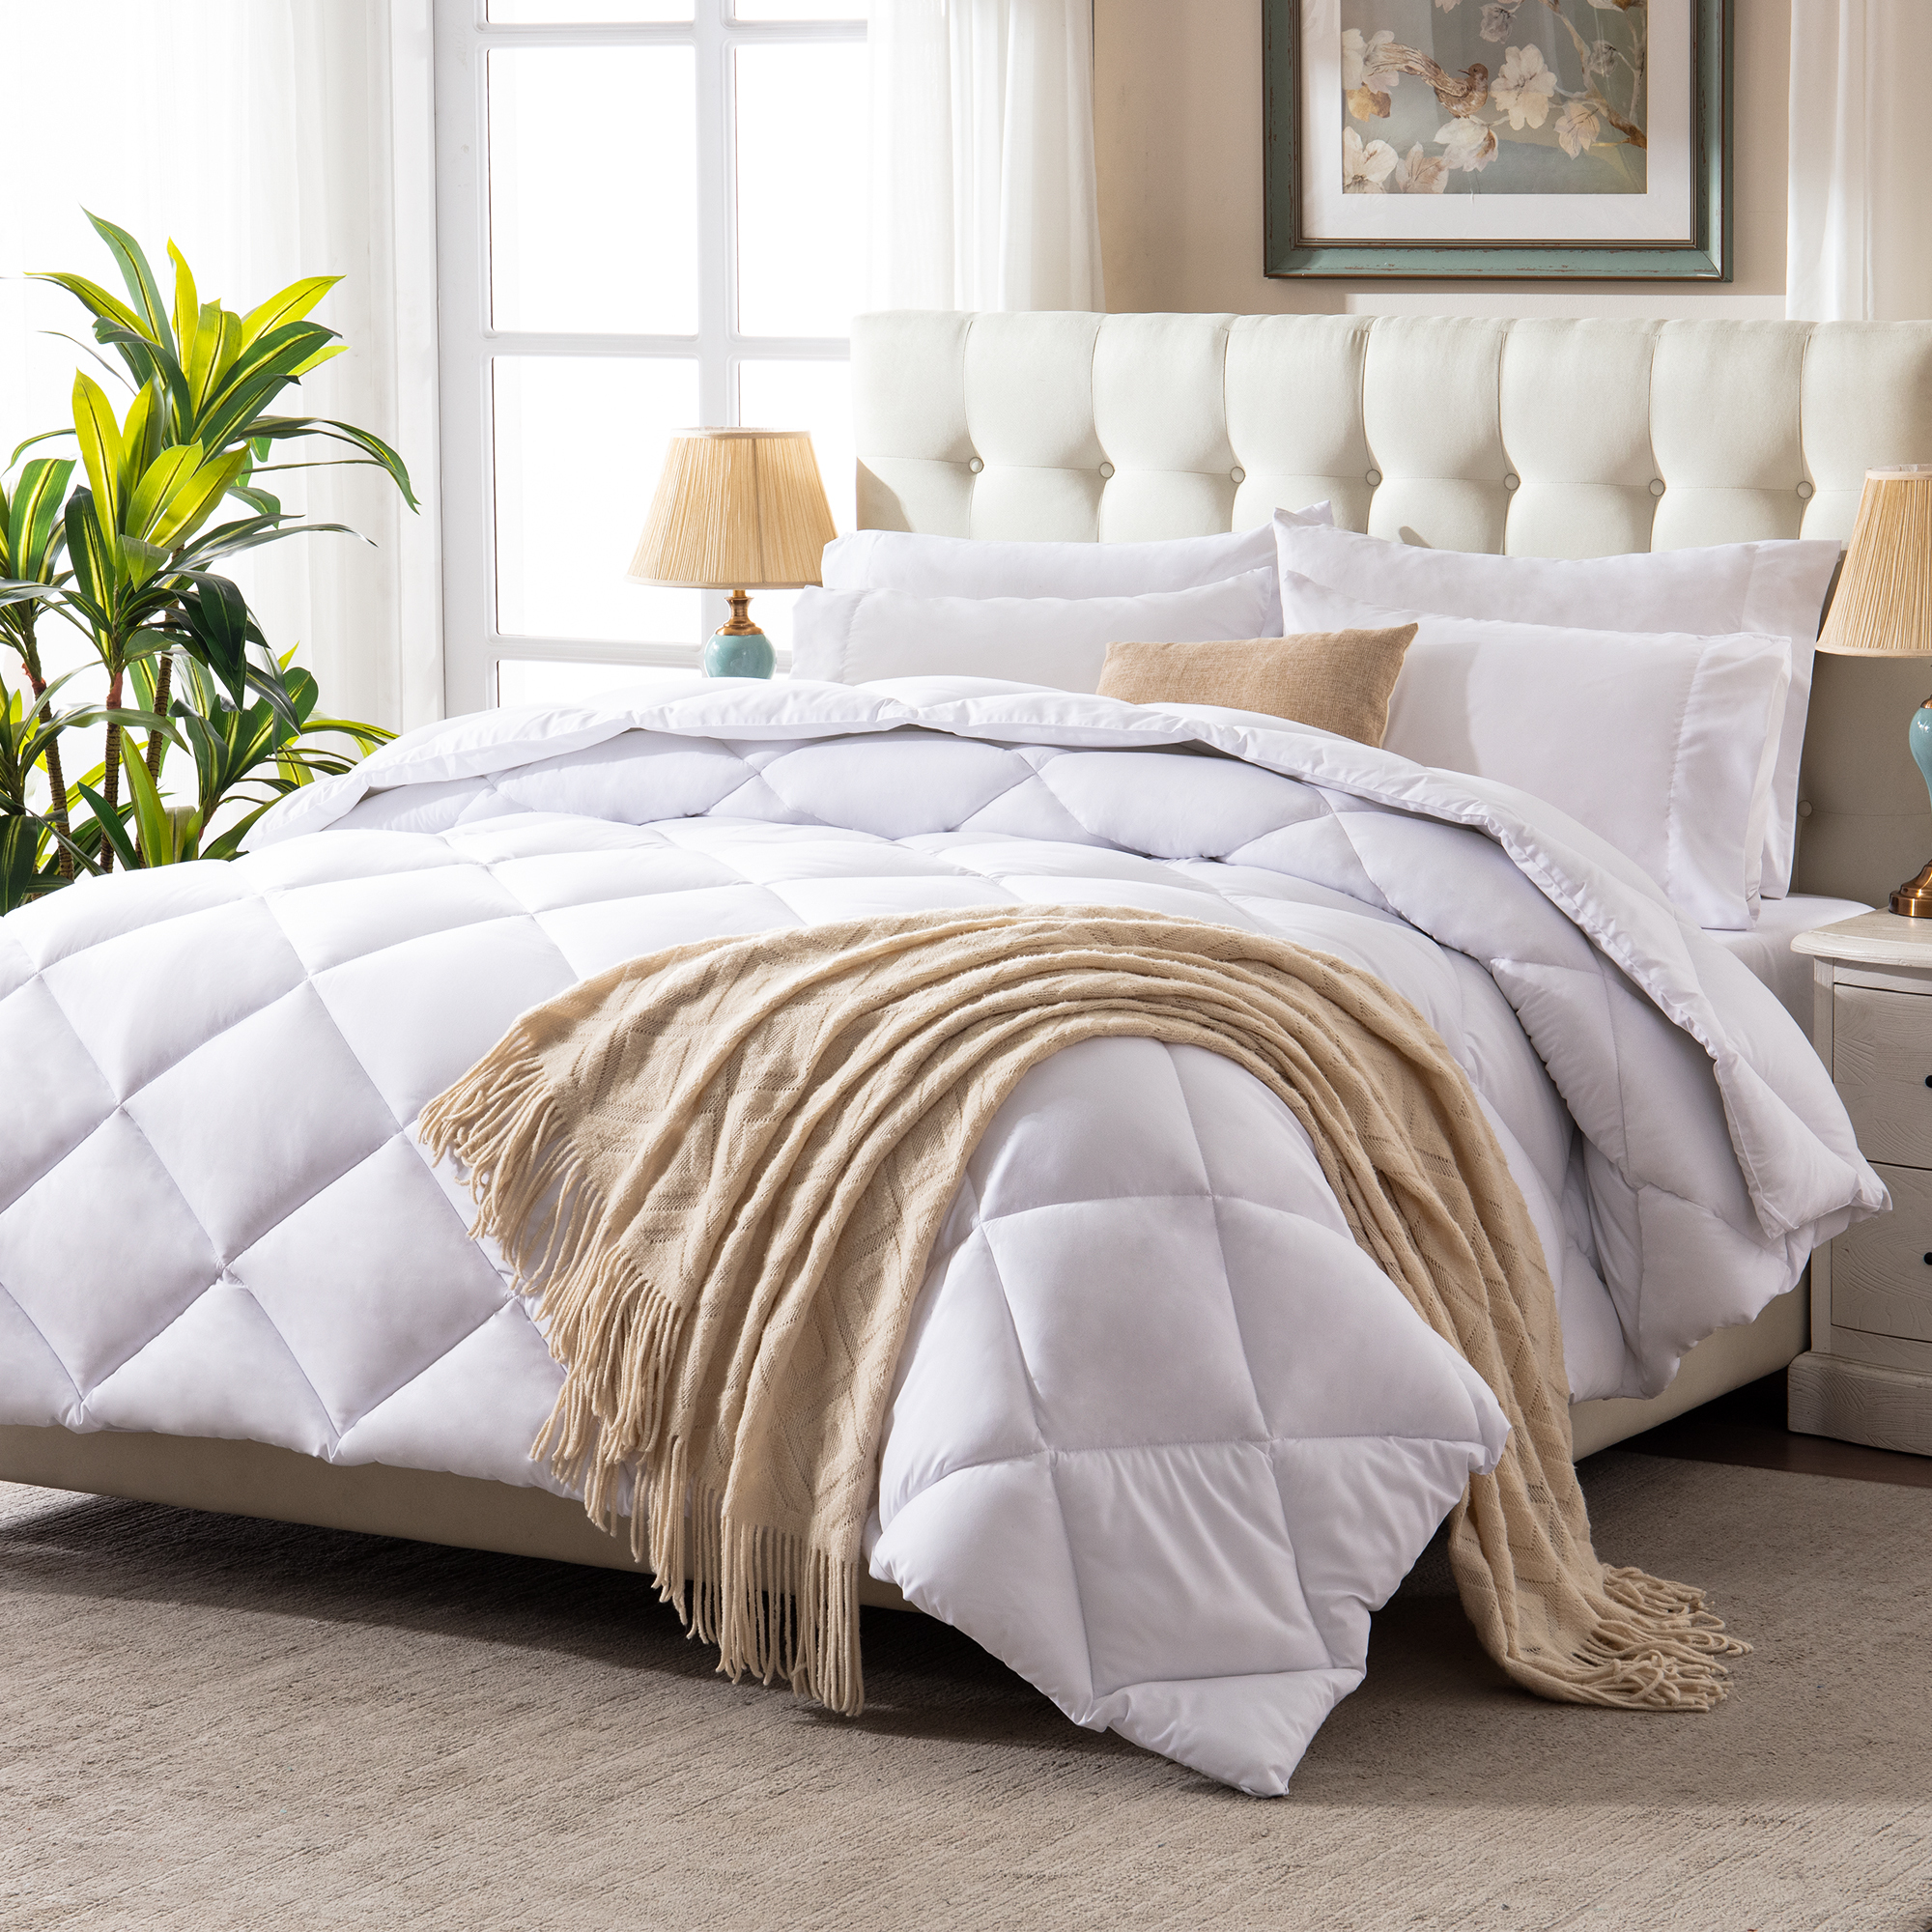 WhatsBedding 3 Pieces Bed in a Bag Comforter Set Duvet Insert,Reversible,White,Queen - image 3 of 8